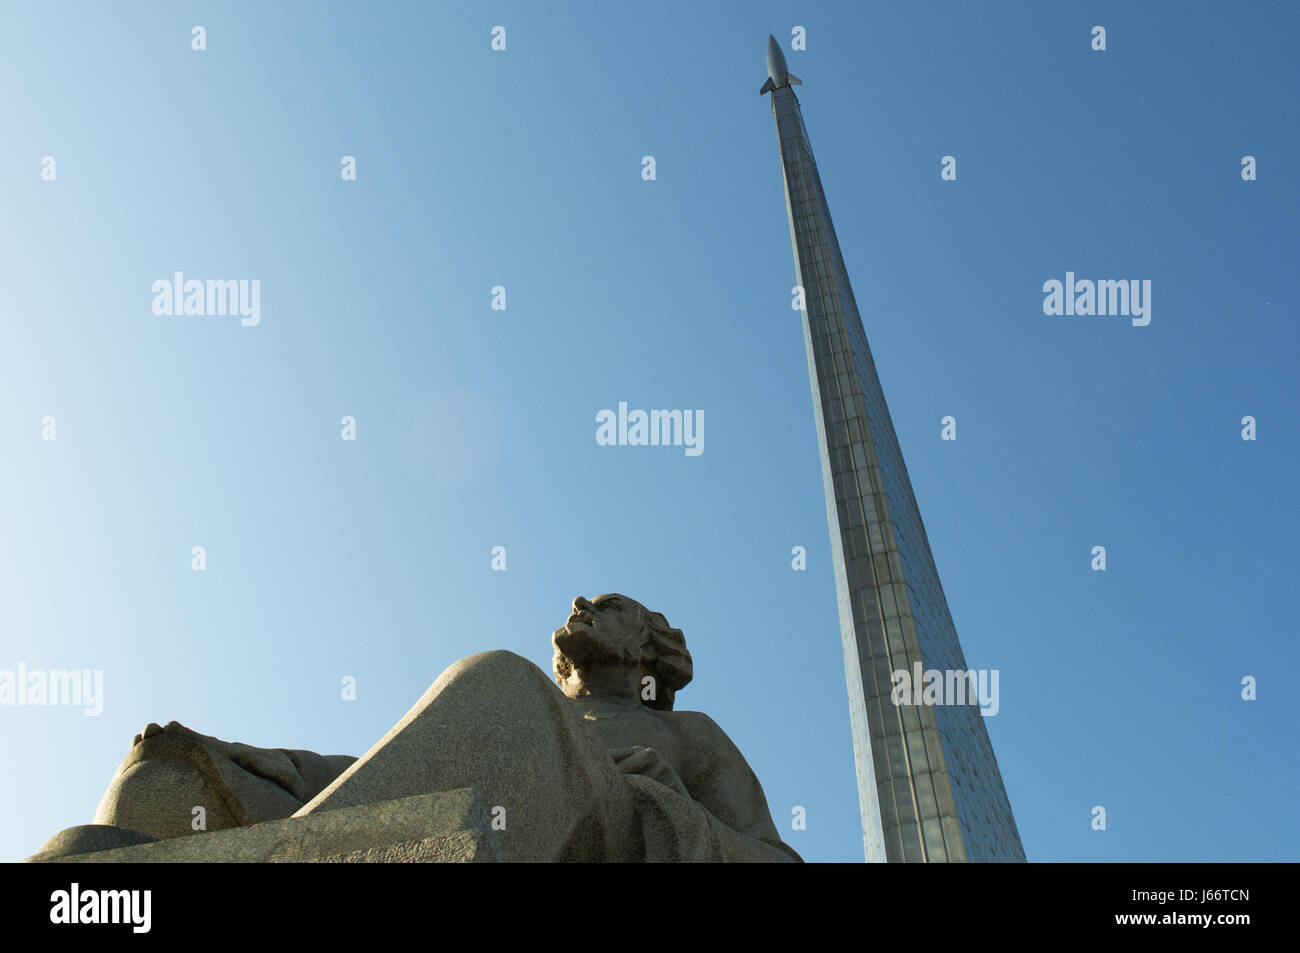 Statue of Konstantin Tsiolkovsky, precursor of astronautics, and the Monument to the Conquerors of Space, built to celebrate Soviet space exploration Stock Photo